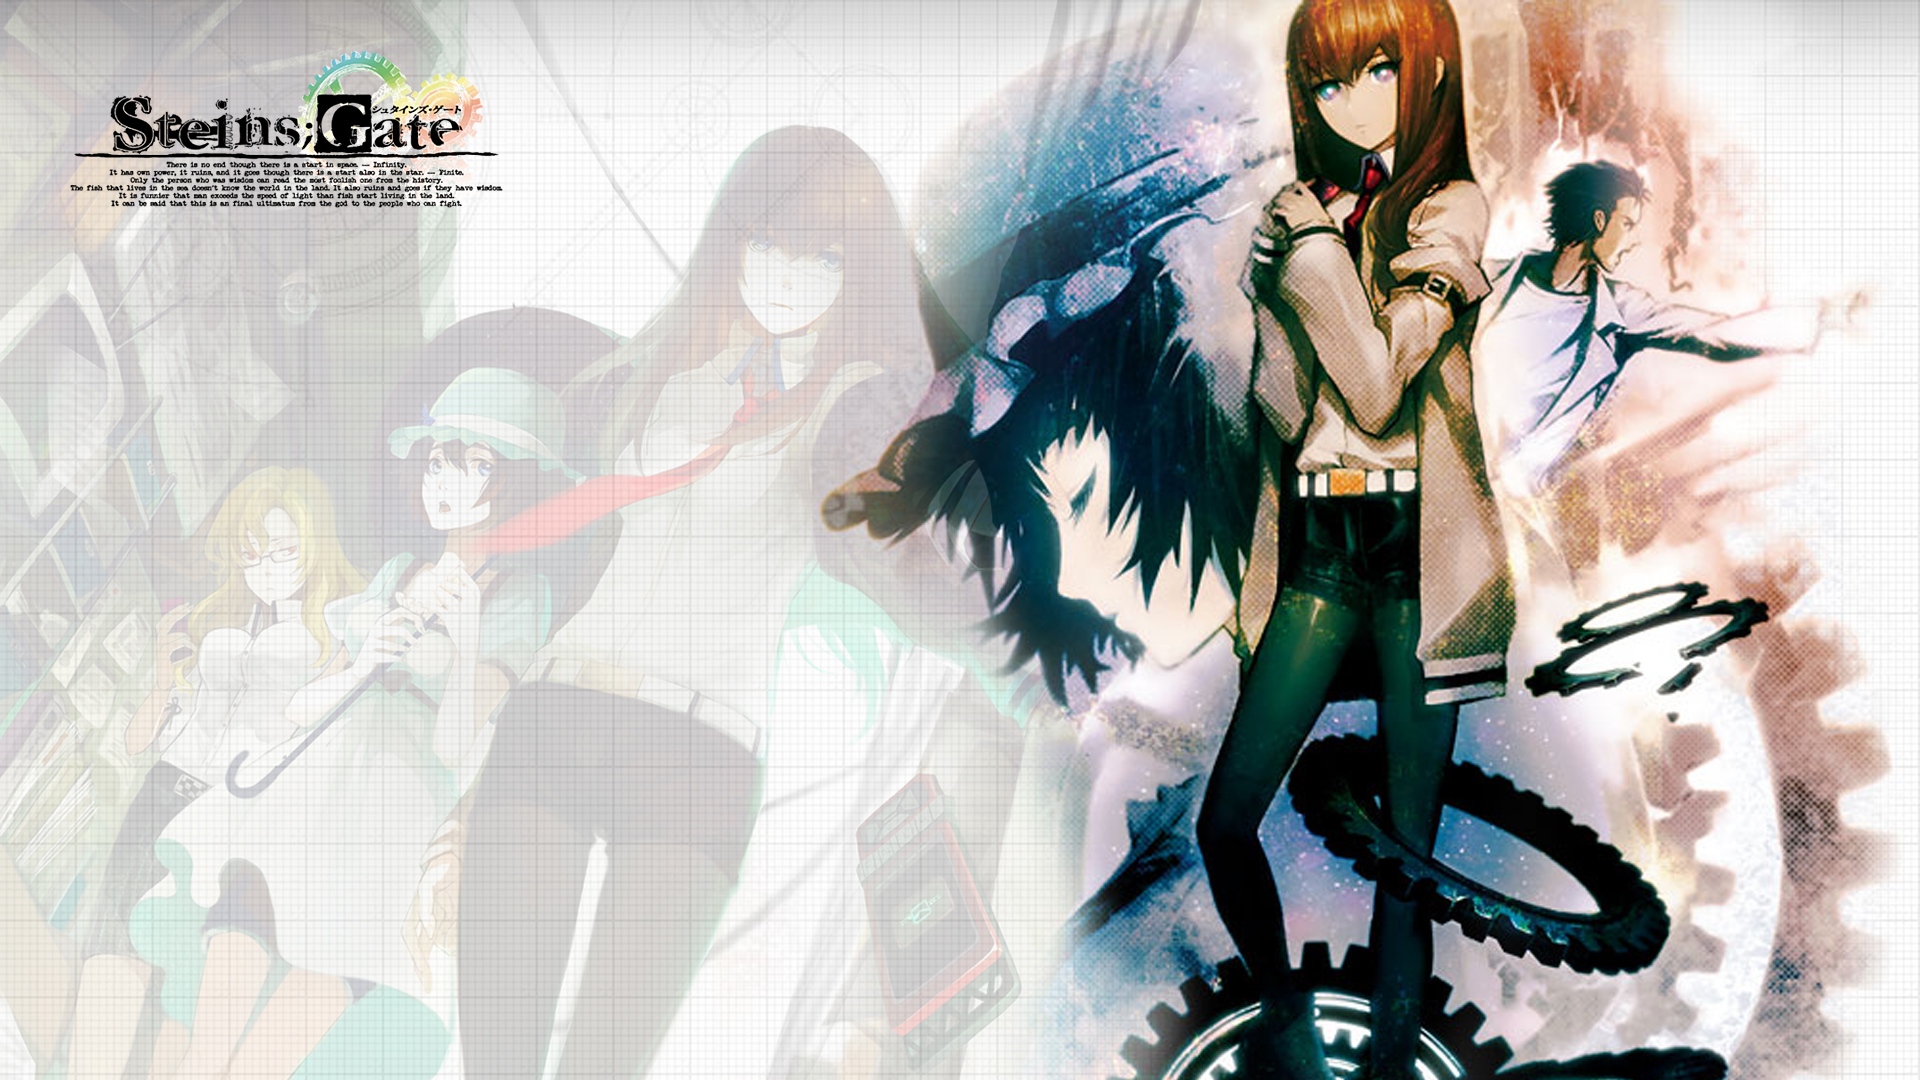 Free Download Steinsgate 07 2327 19x1080 For Your Desktop Mobile Tablet Explore 50 Steins Gate Wallpaper Steins Gate Wallpaper 1080p Steins Gate Wallpaper Hd Gate Anime Wallpaper